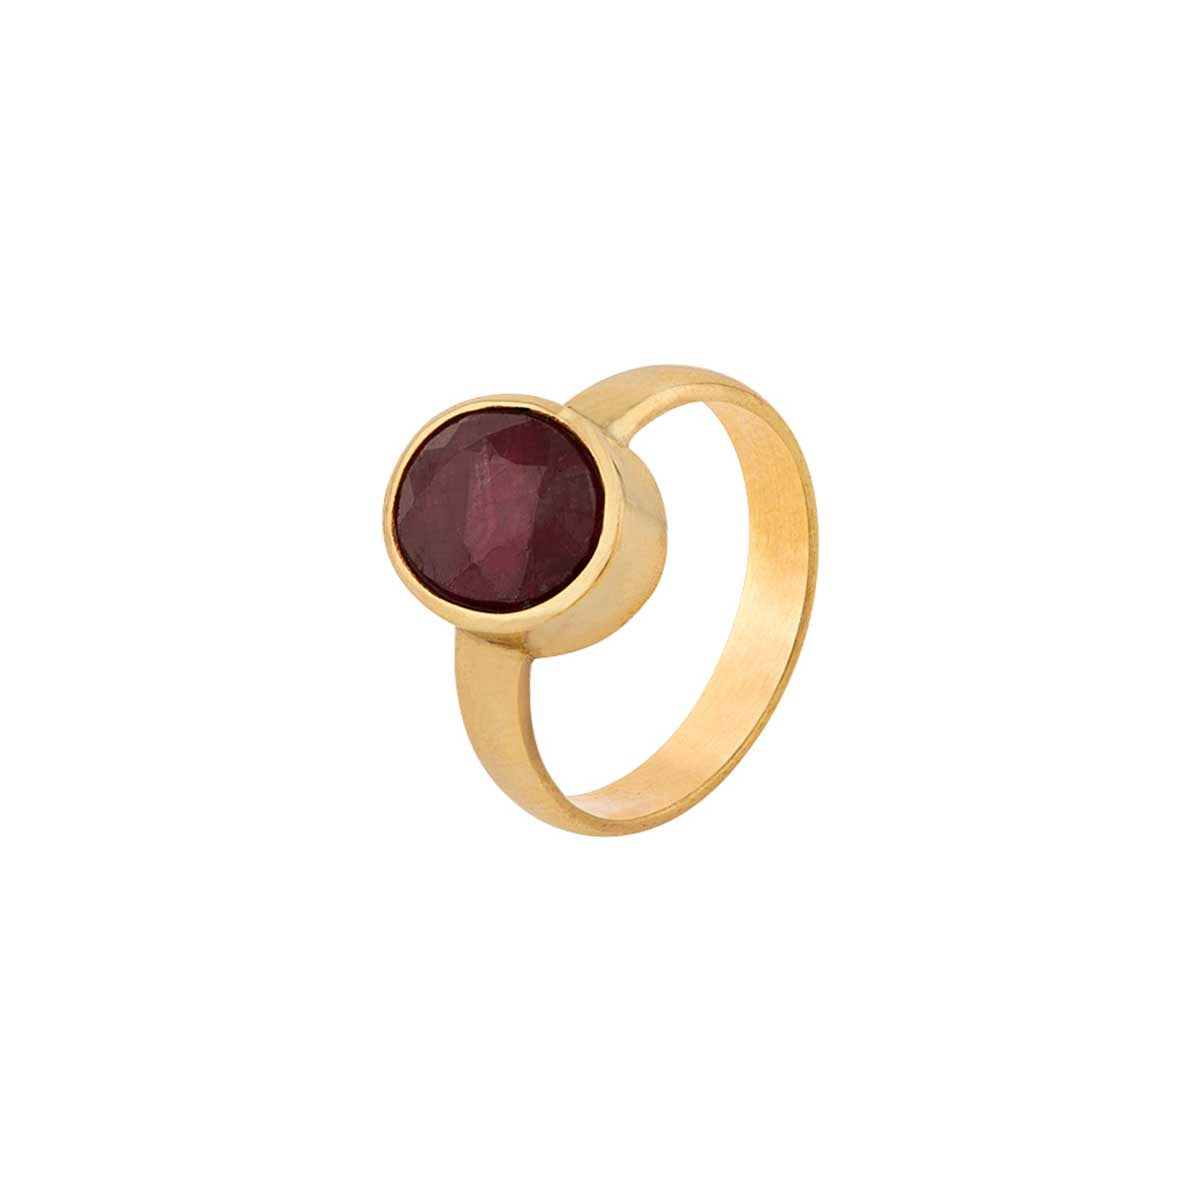 Pink Round Natural Ruby(Manik) Gemstone Gold Plated Finger Ring, Size: 5.5,  6gm at Rs 15950 in Delhi